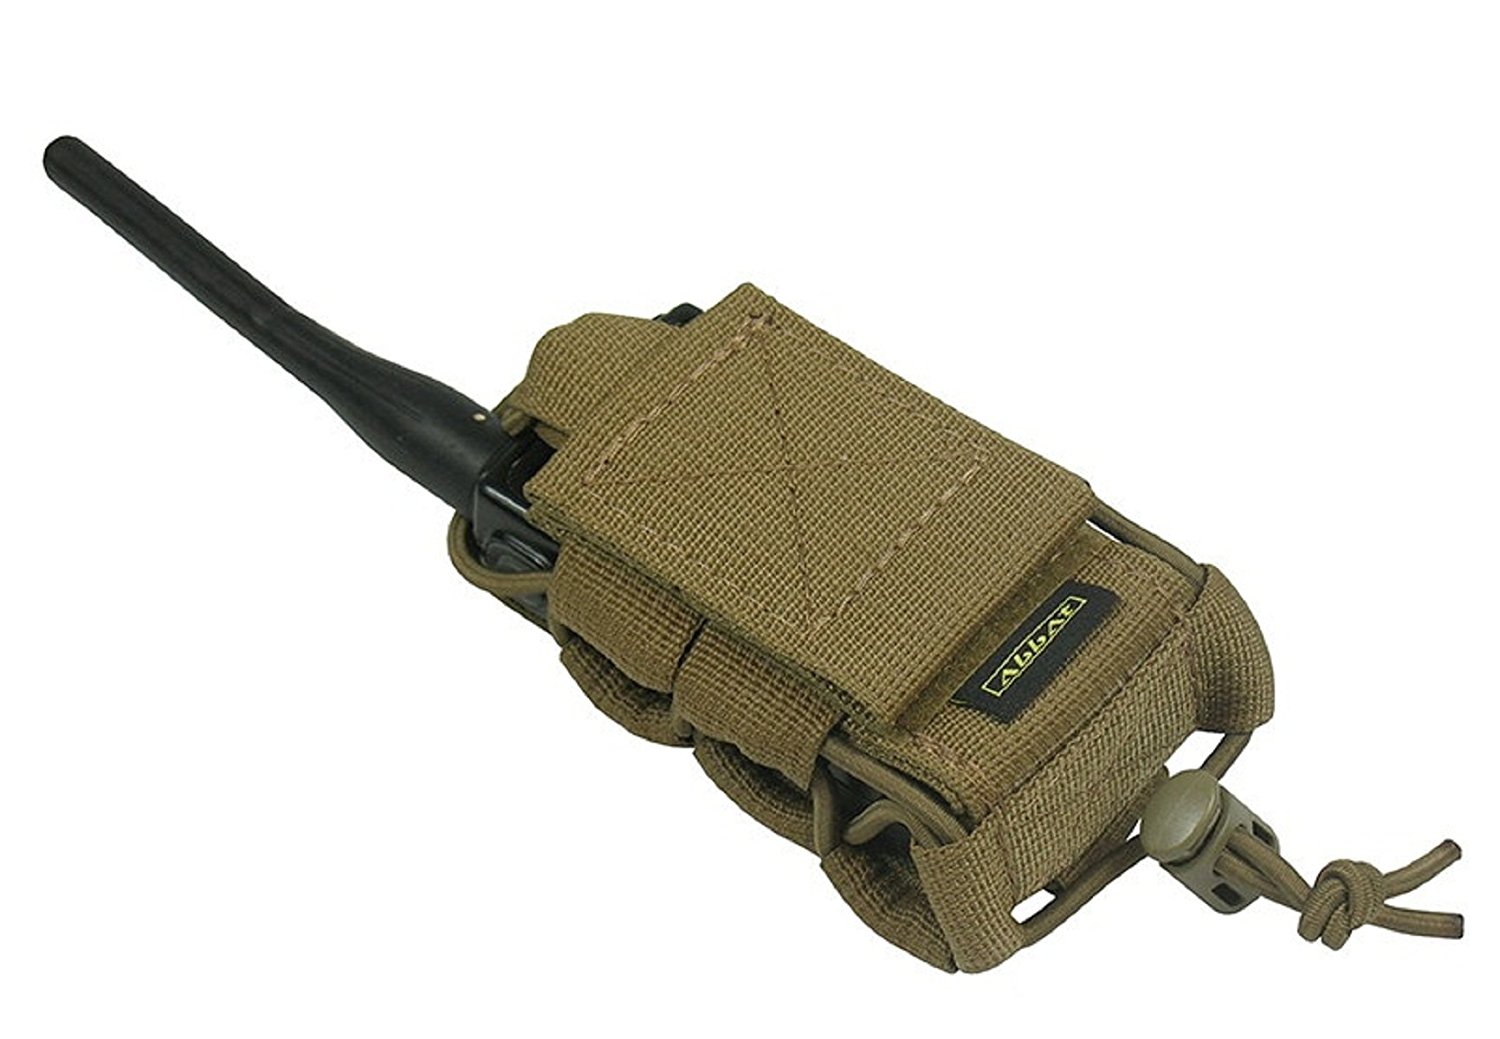 1000D Nylon Tactical Military Molle Radio Walkie Talkie Holder Bag Pouch 